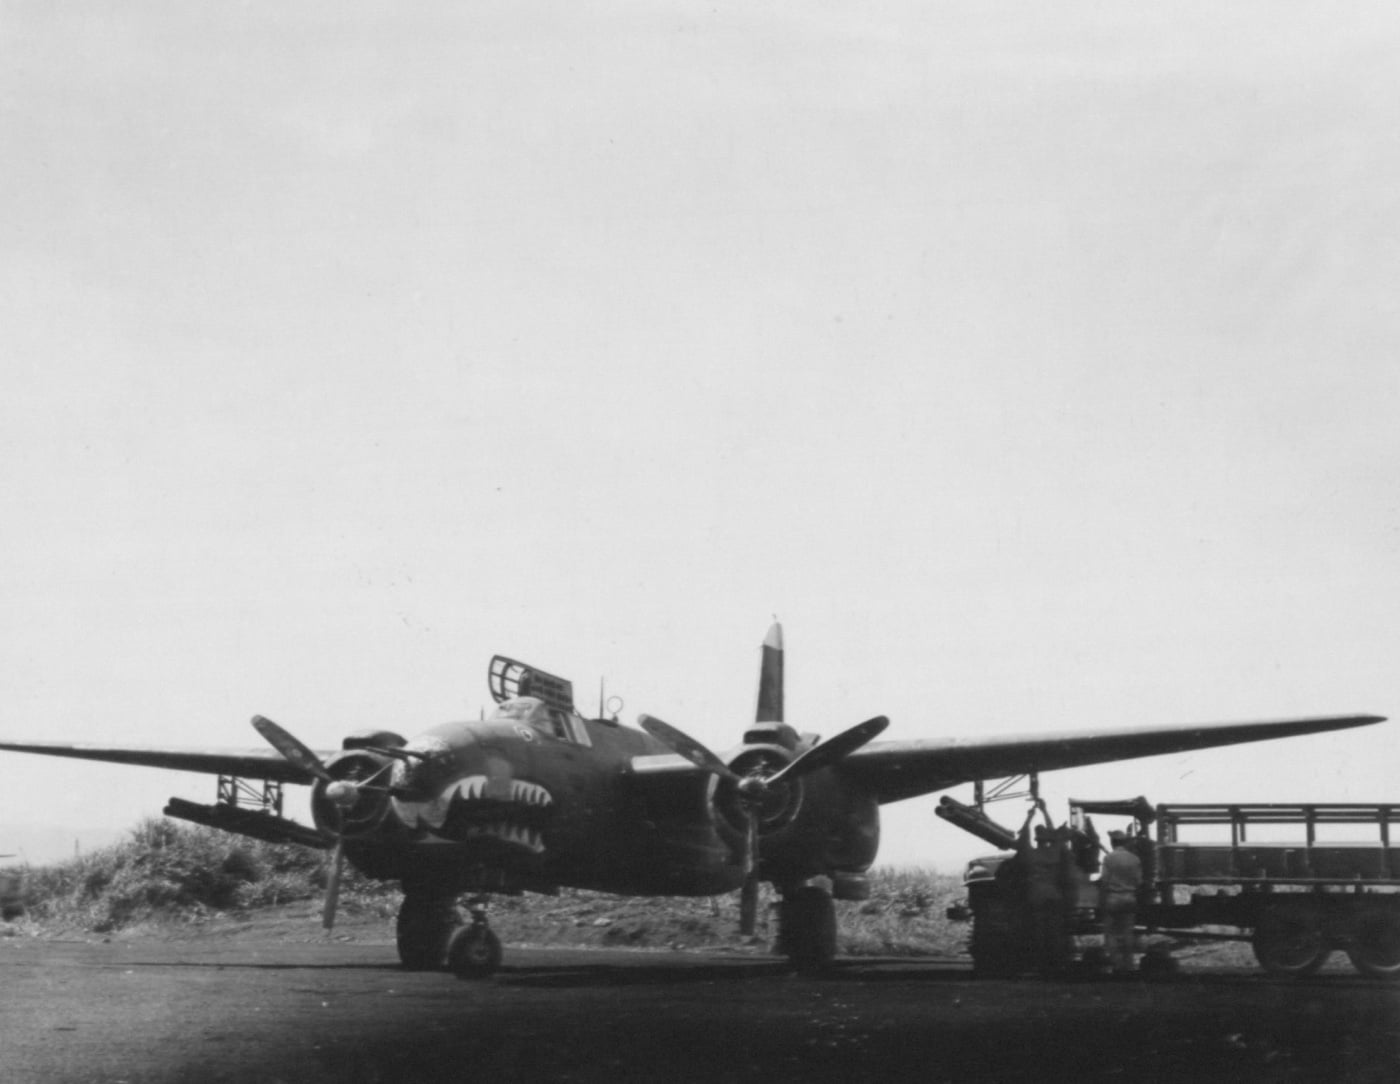 Shown in this photograph is an A-20 Havoc bomber with rocket pods attached to the wings of the plane.